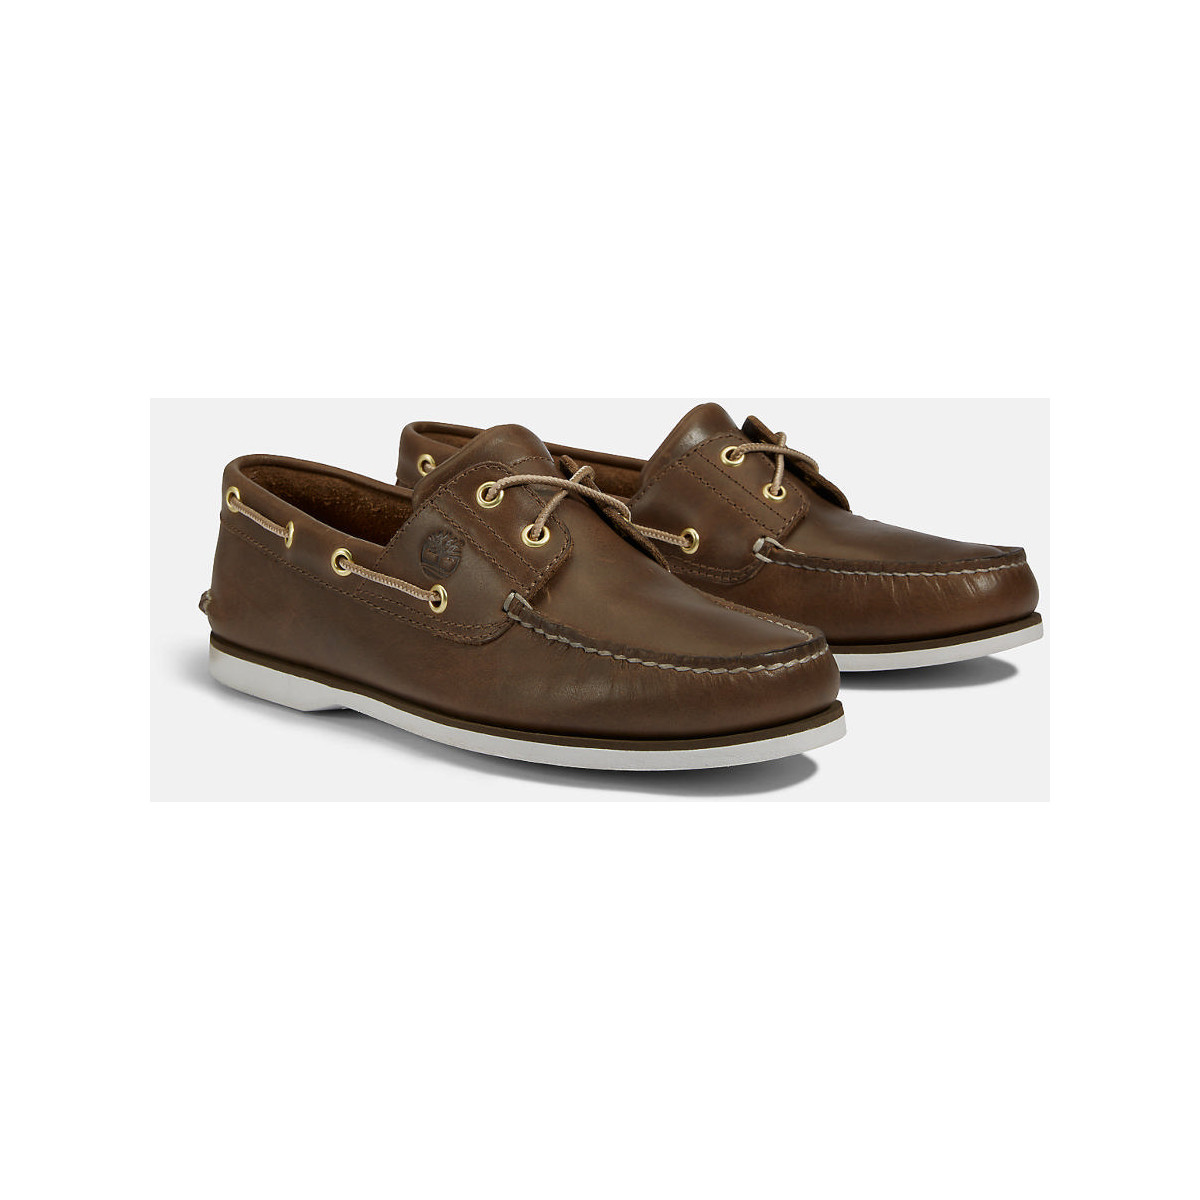 Timberland Classic Boat chaussure bateau homme - marron, pointure 42